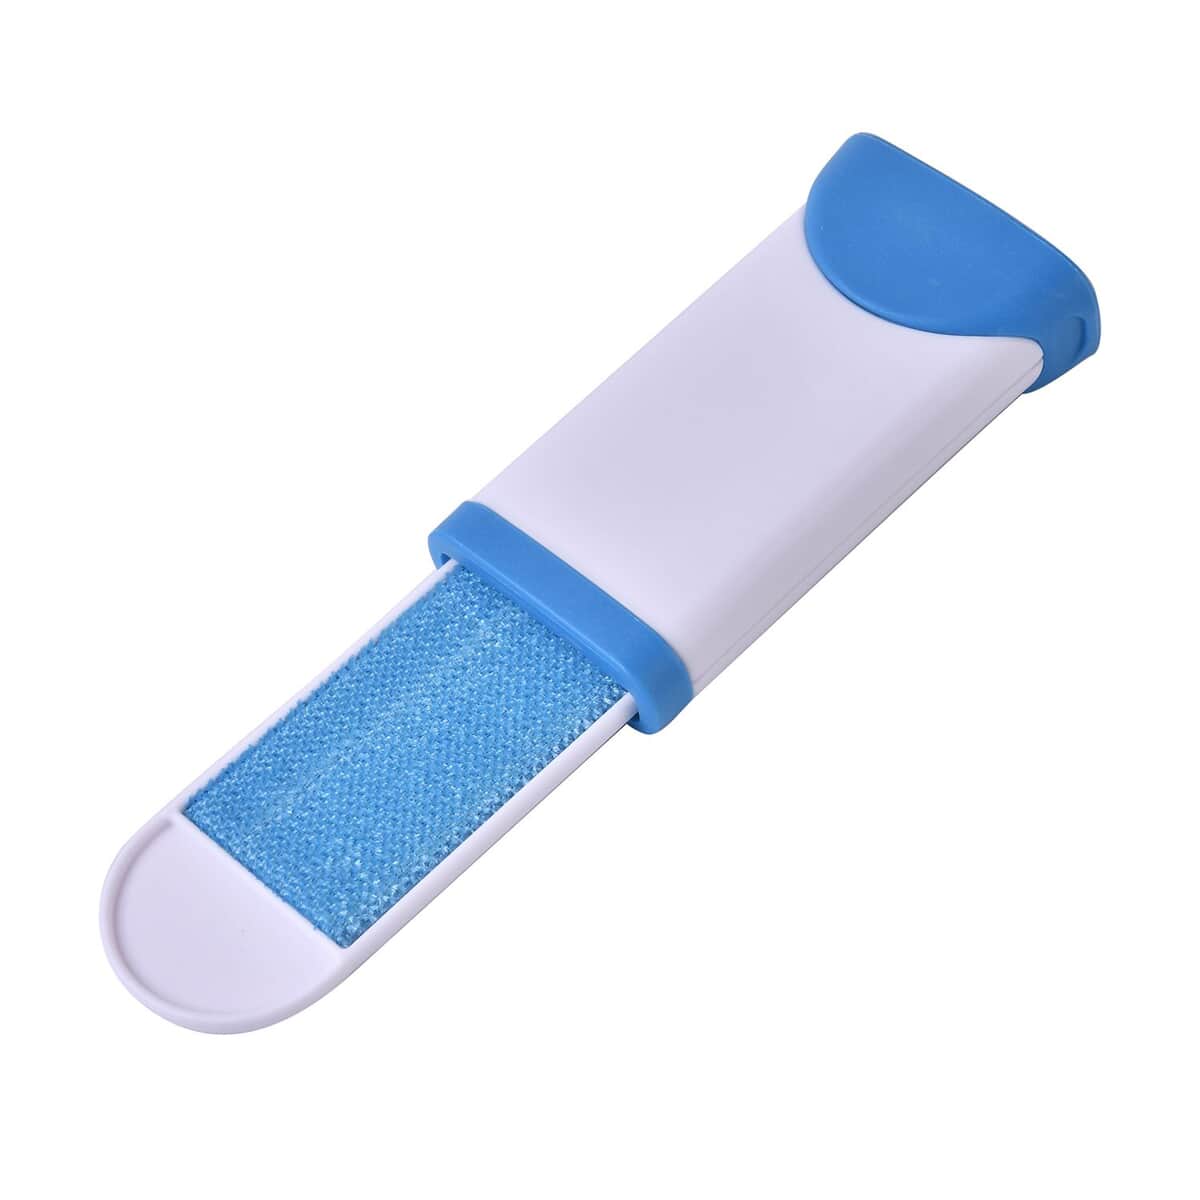 Set of 2 Blue Double Sided Cleaning Brush (3.54"x1.57"x12.6") & (2.16"x0.98"x5.51") image number 4